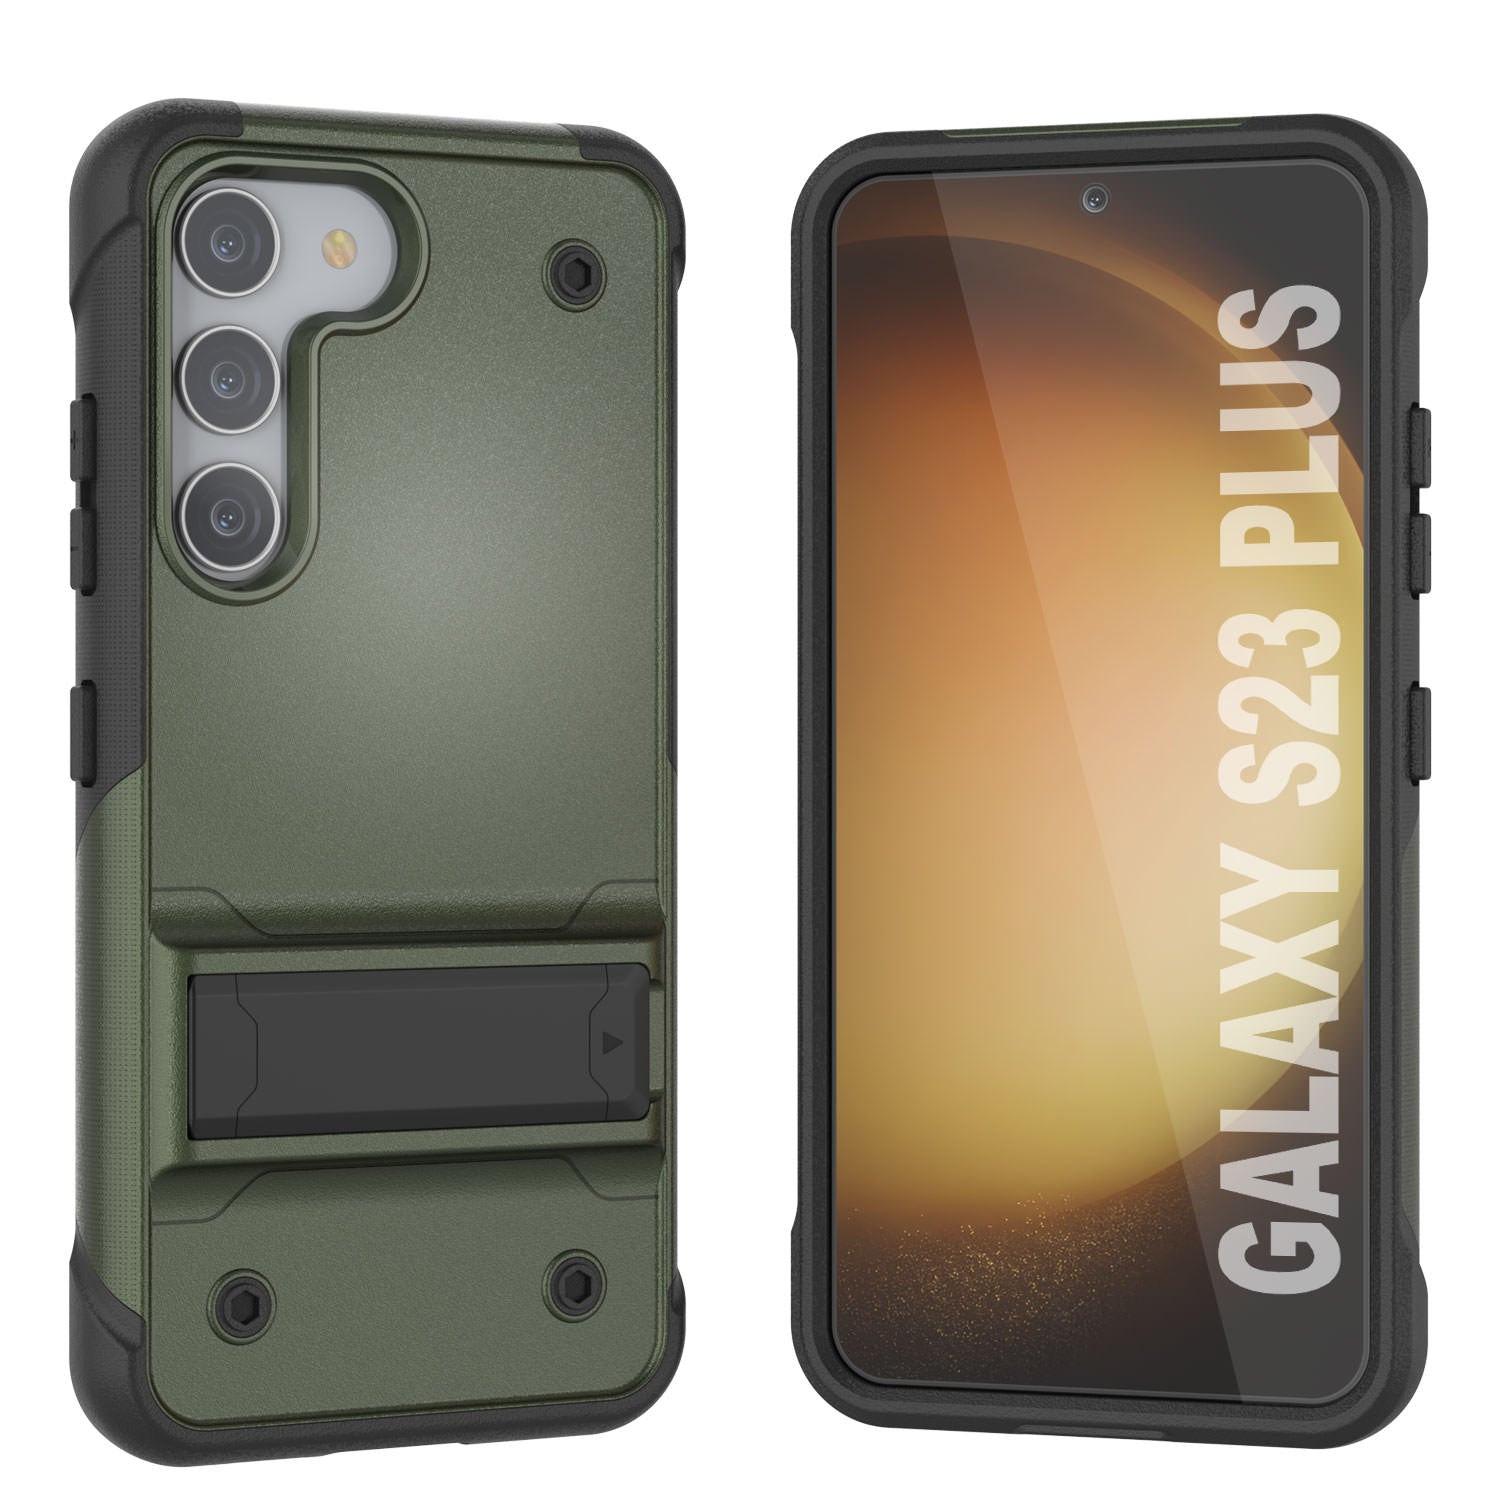 Punkcase Galaxy S24+ Plus Case [Reliance Series] Protective Hybrid Military Grade Cover W/Built-in Kickstand [Army-Green-Black]